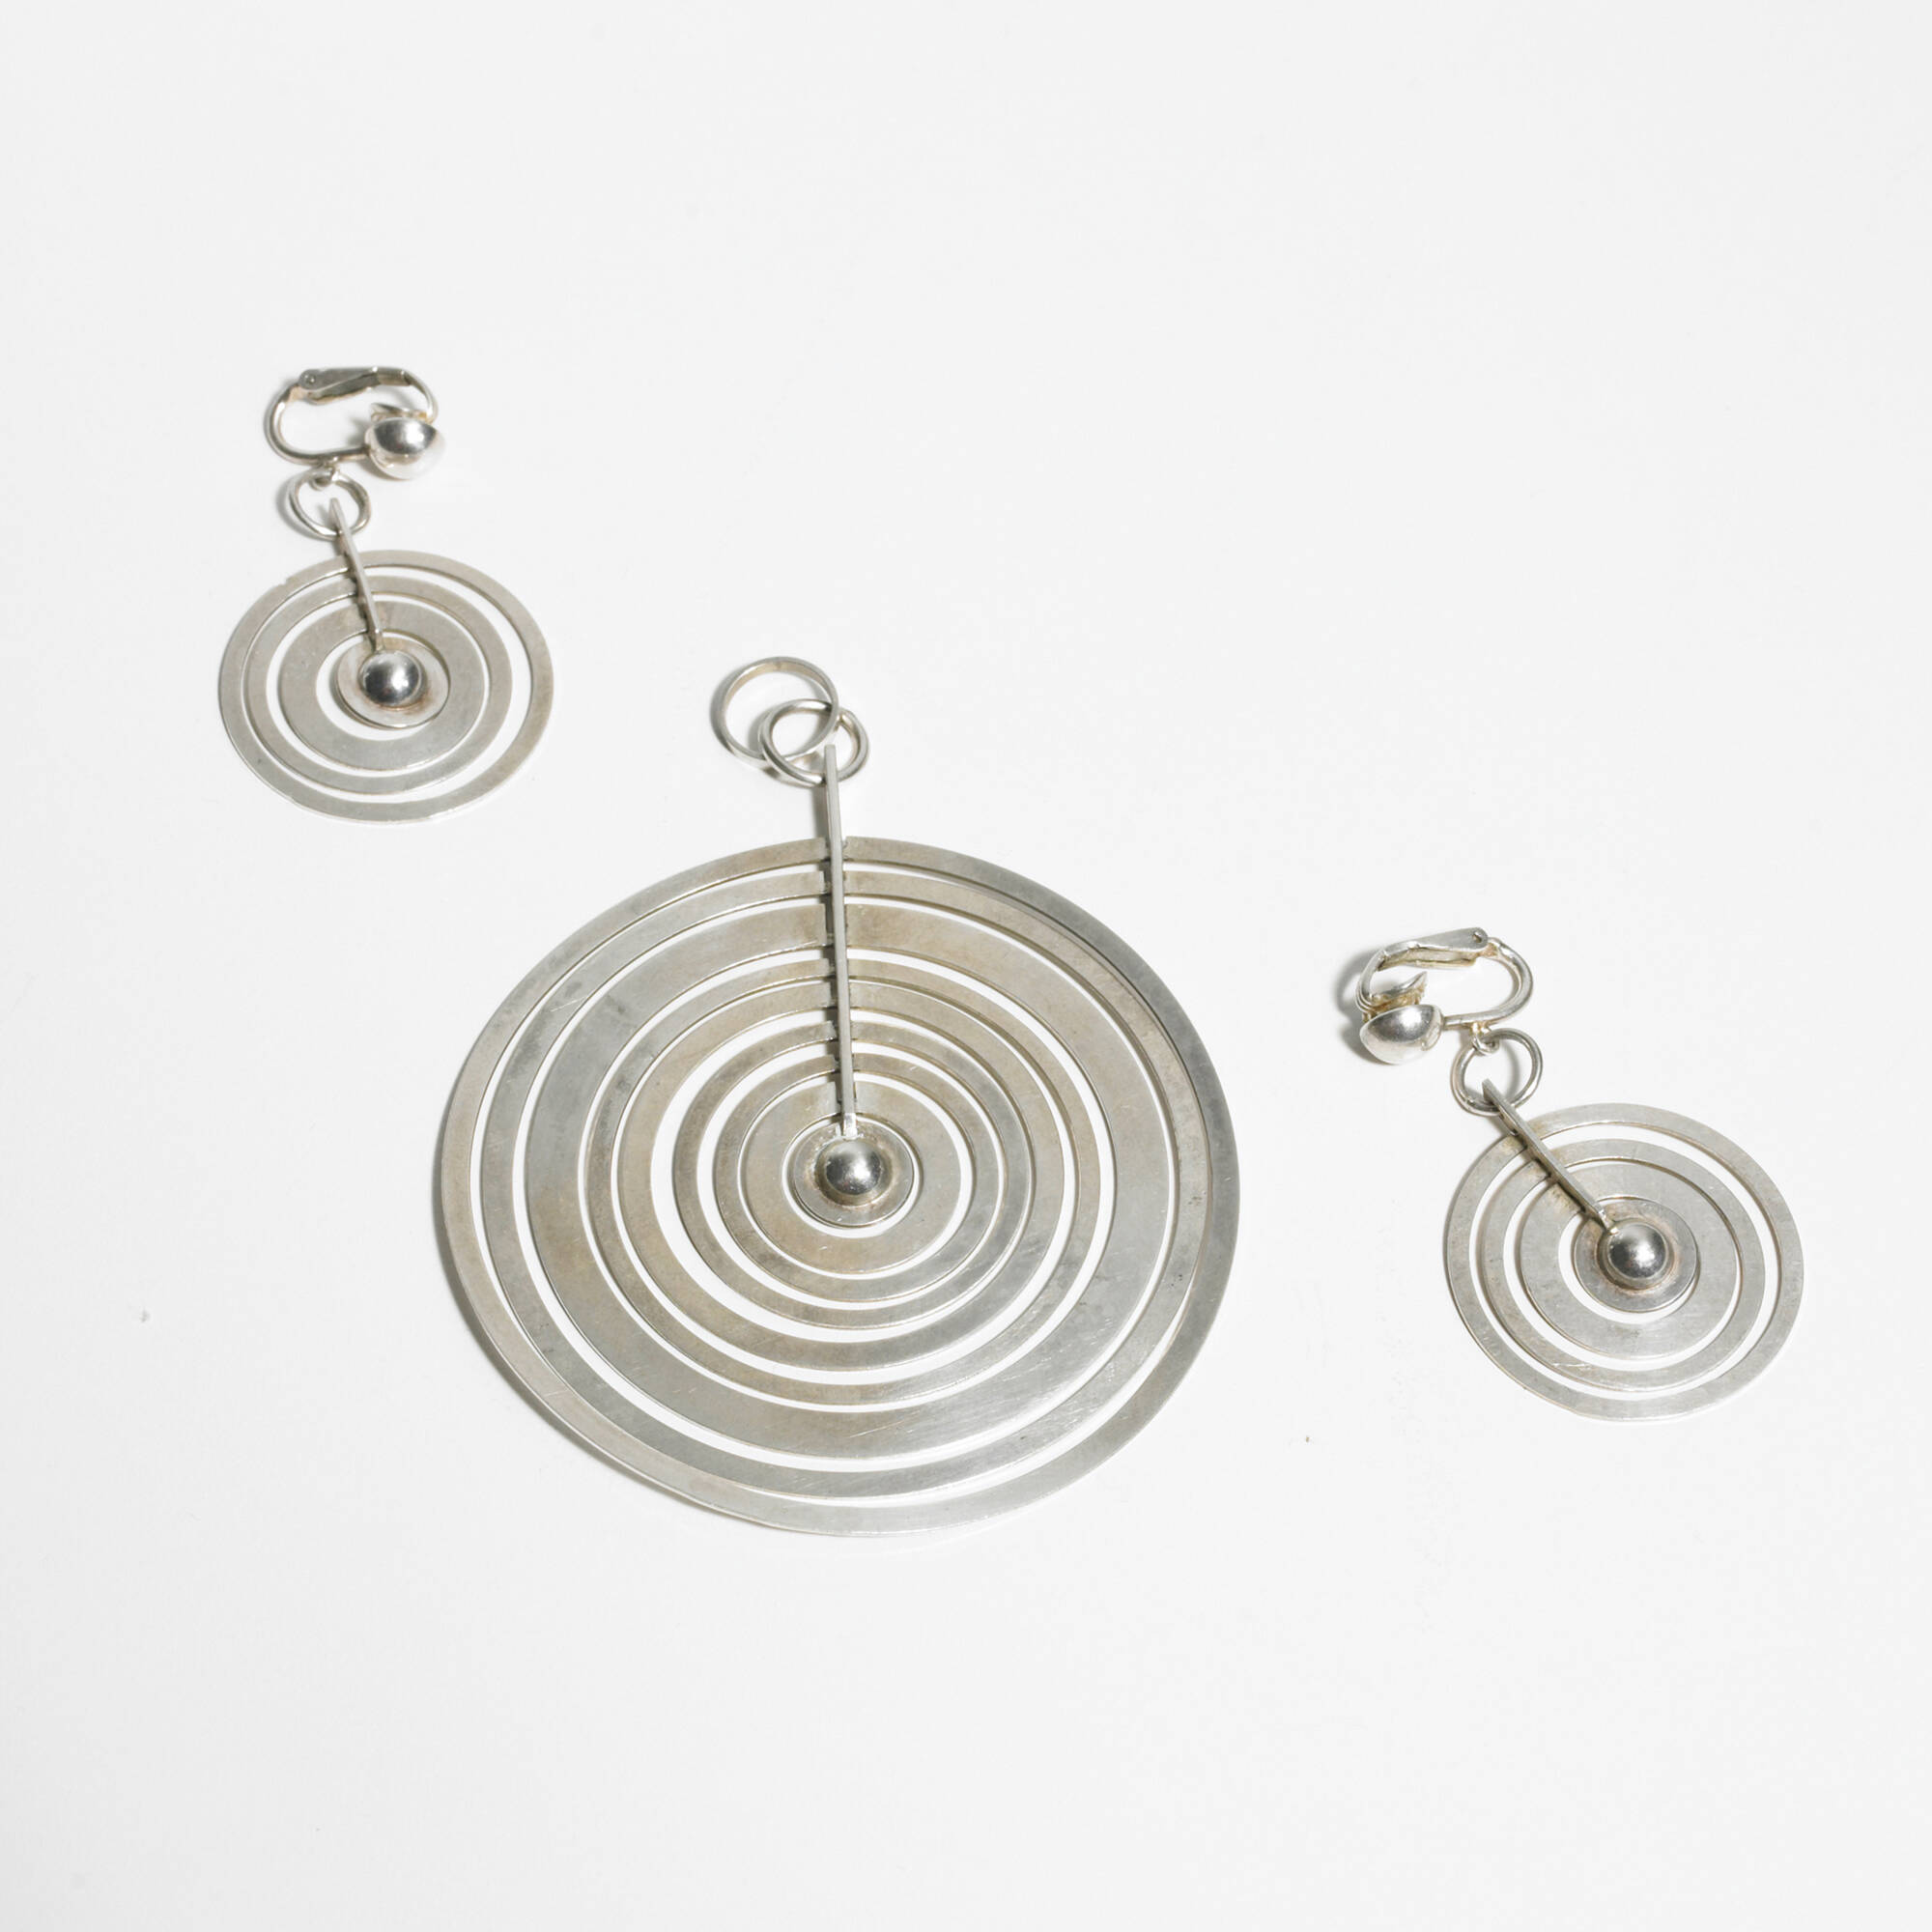 248: TAPIO WIRKKALA, Hopeakuu pendant and pair of earrings < Modern Design,  24 March 2009 < Auctions | Wright: Auctions of Art and Design